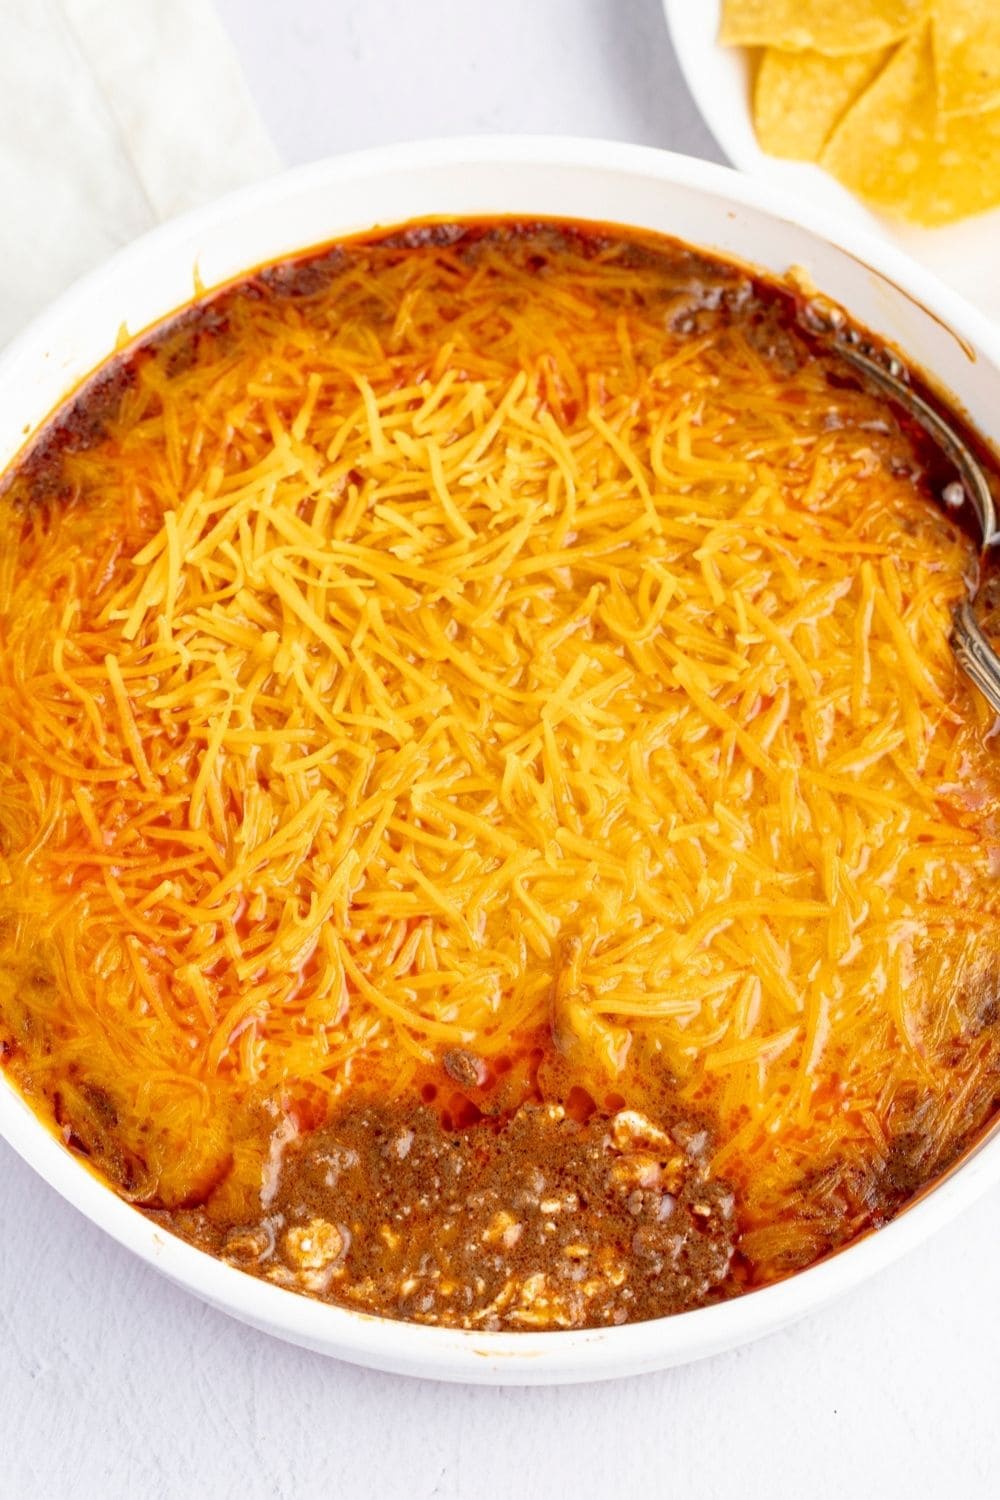 Cheesy Skyline Chili Dip in a Bowl